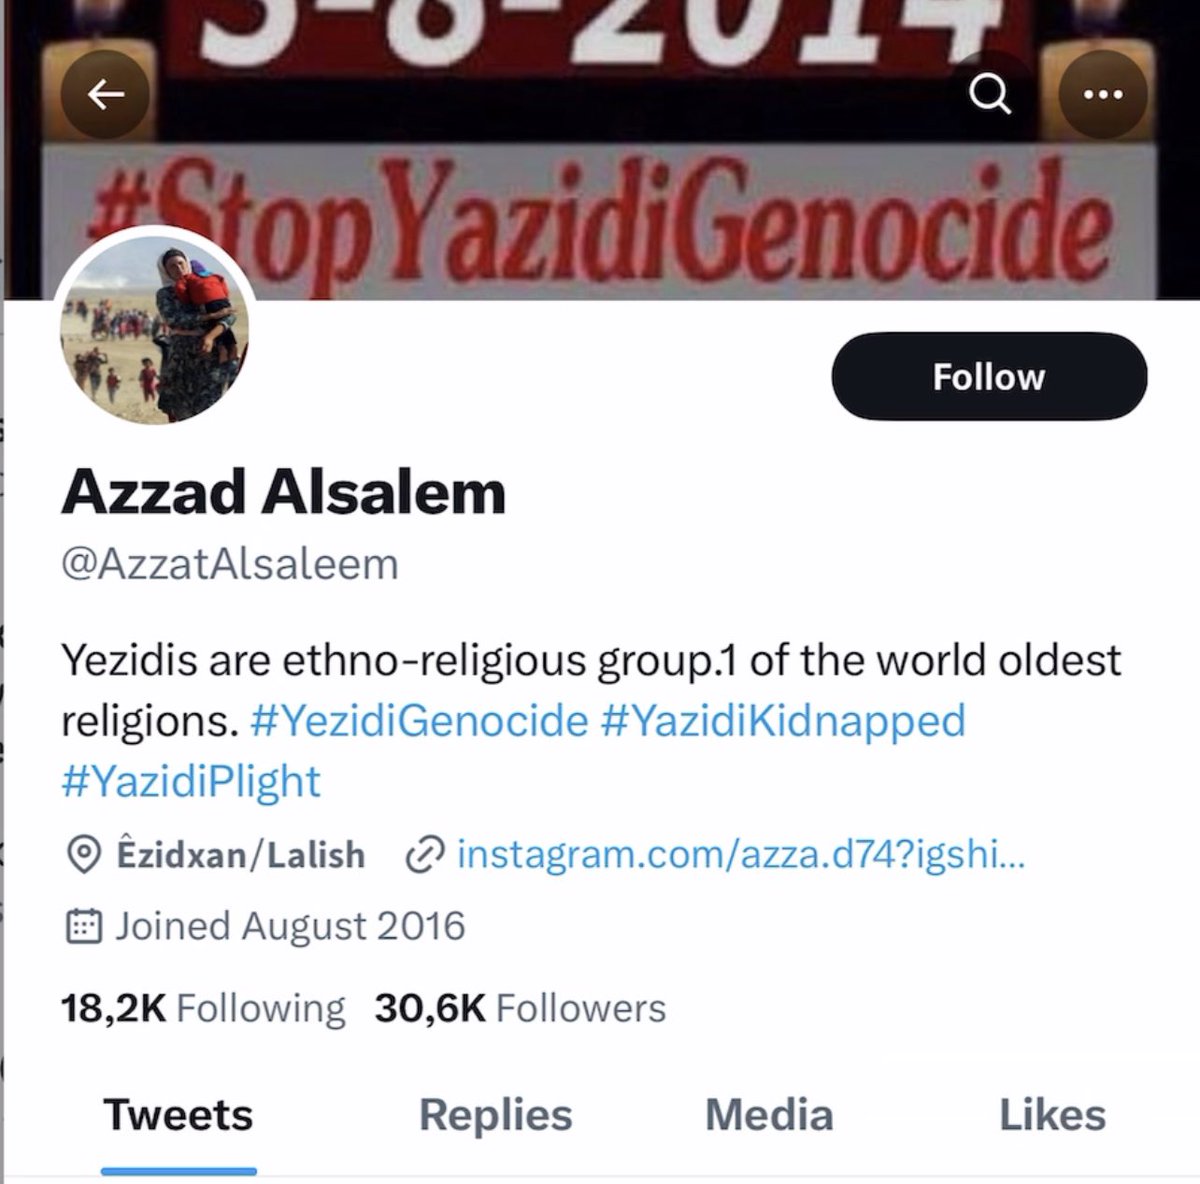 @Twitter @TwitterSupport has suspended the account of Yezidi activist @AzzatAlsaleem ,which is one of active accounts that raise awareness about Yezidis and Yezidi Genocide.
@TarekFatah 
@jihadwatchRS